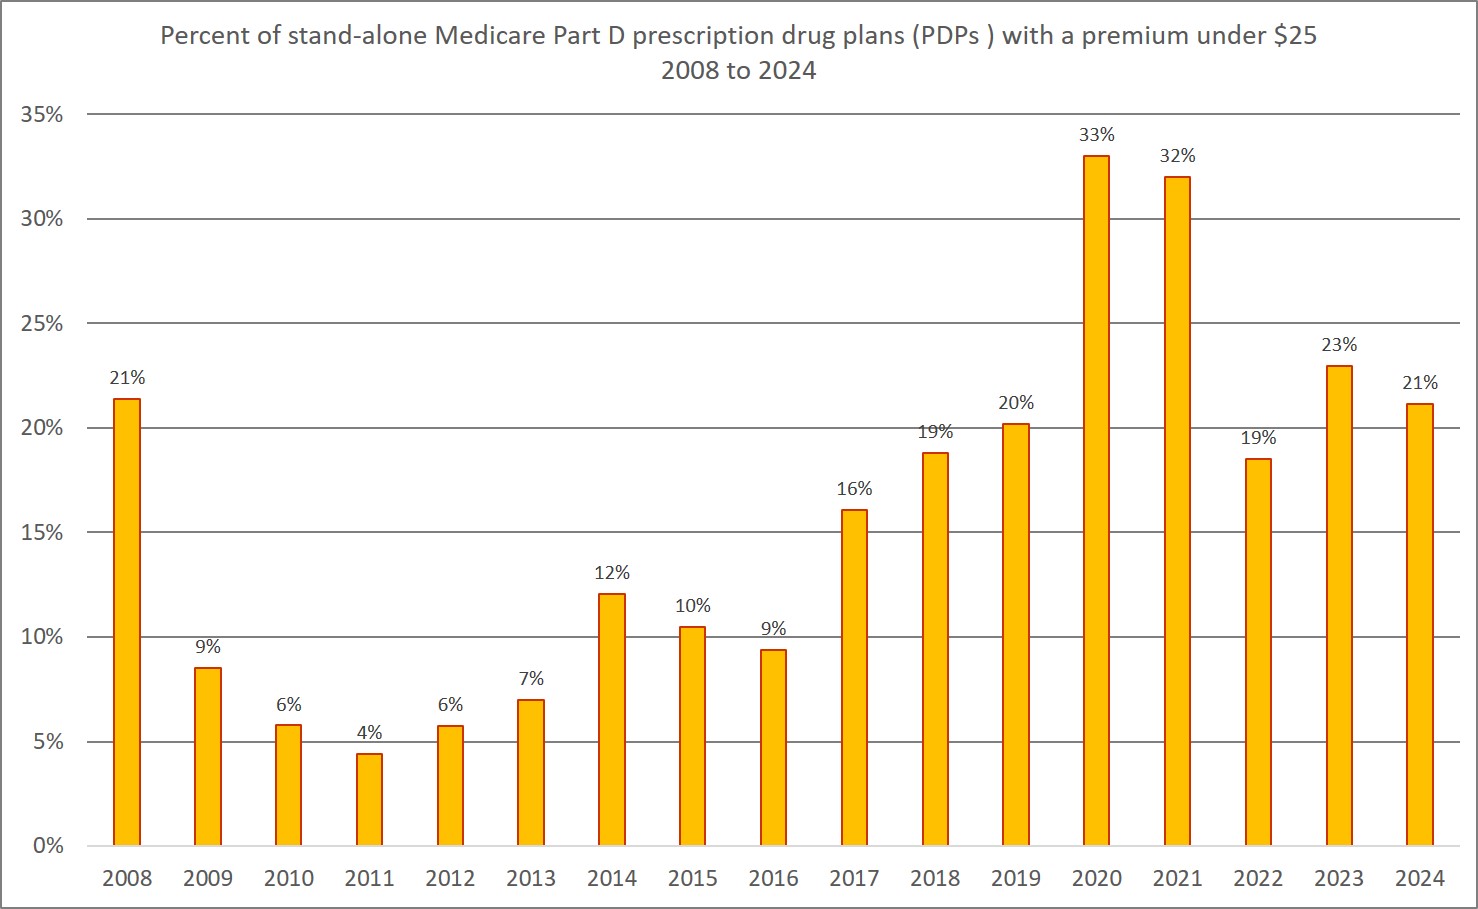 Percentage of PDPs with premiums under $25 2008 to 2024